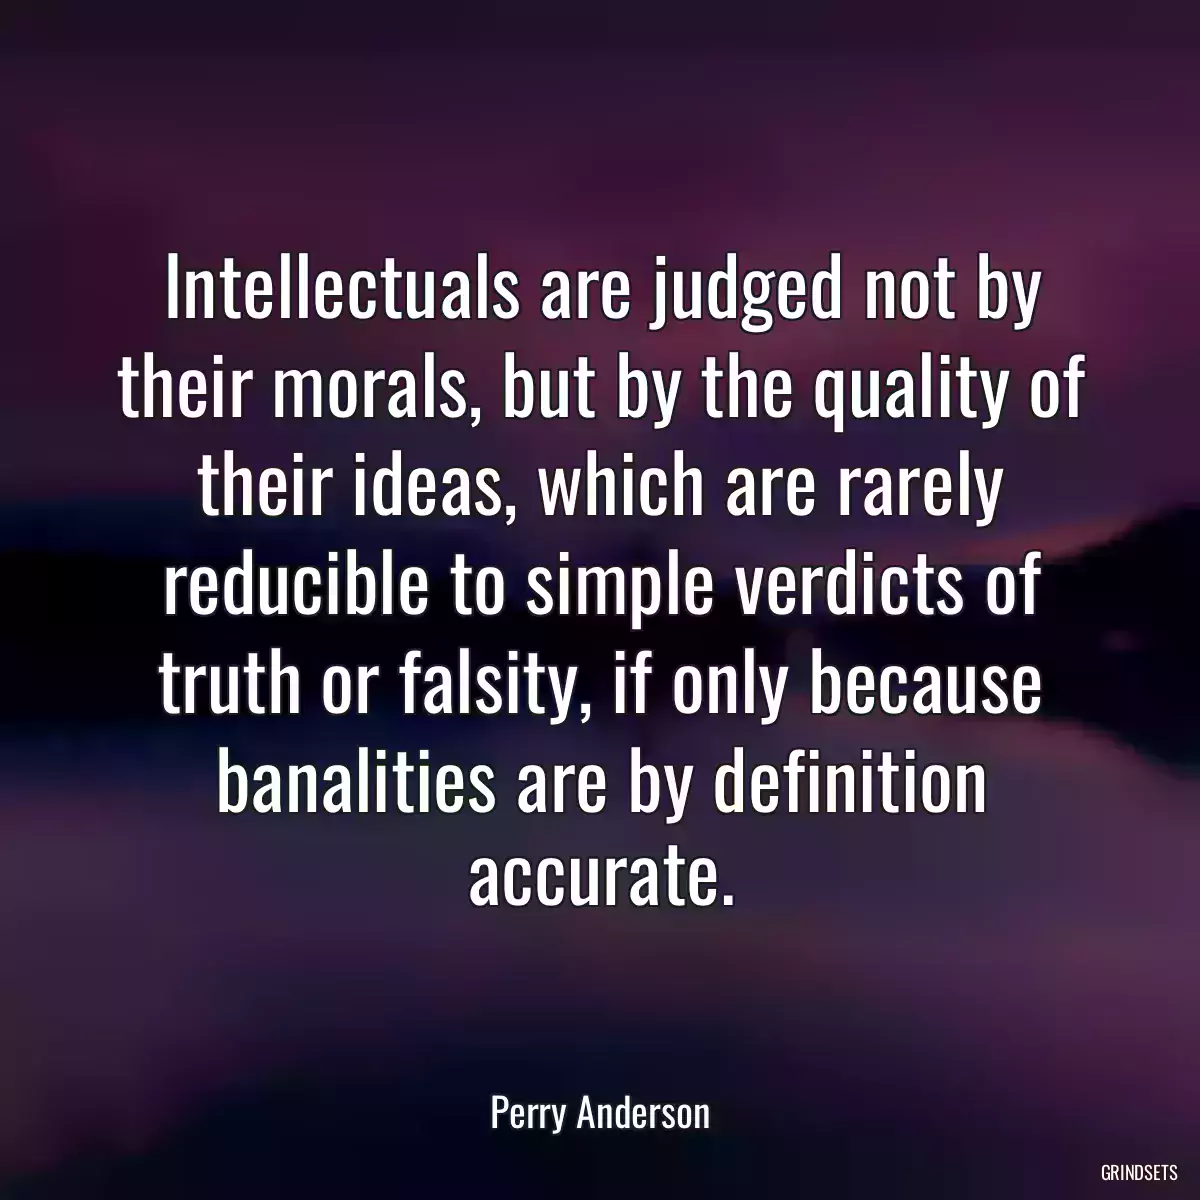 Intellectuals are judged not by their morals, but by the quality of their ideas, which are rarely reducible to simple verdicts of truth or falsity, if only because banalities are by definition accurate.